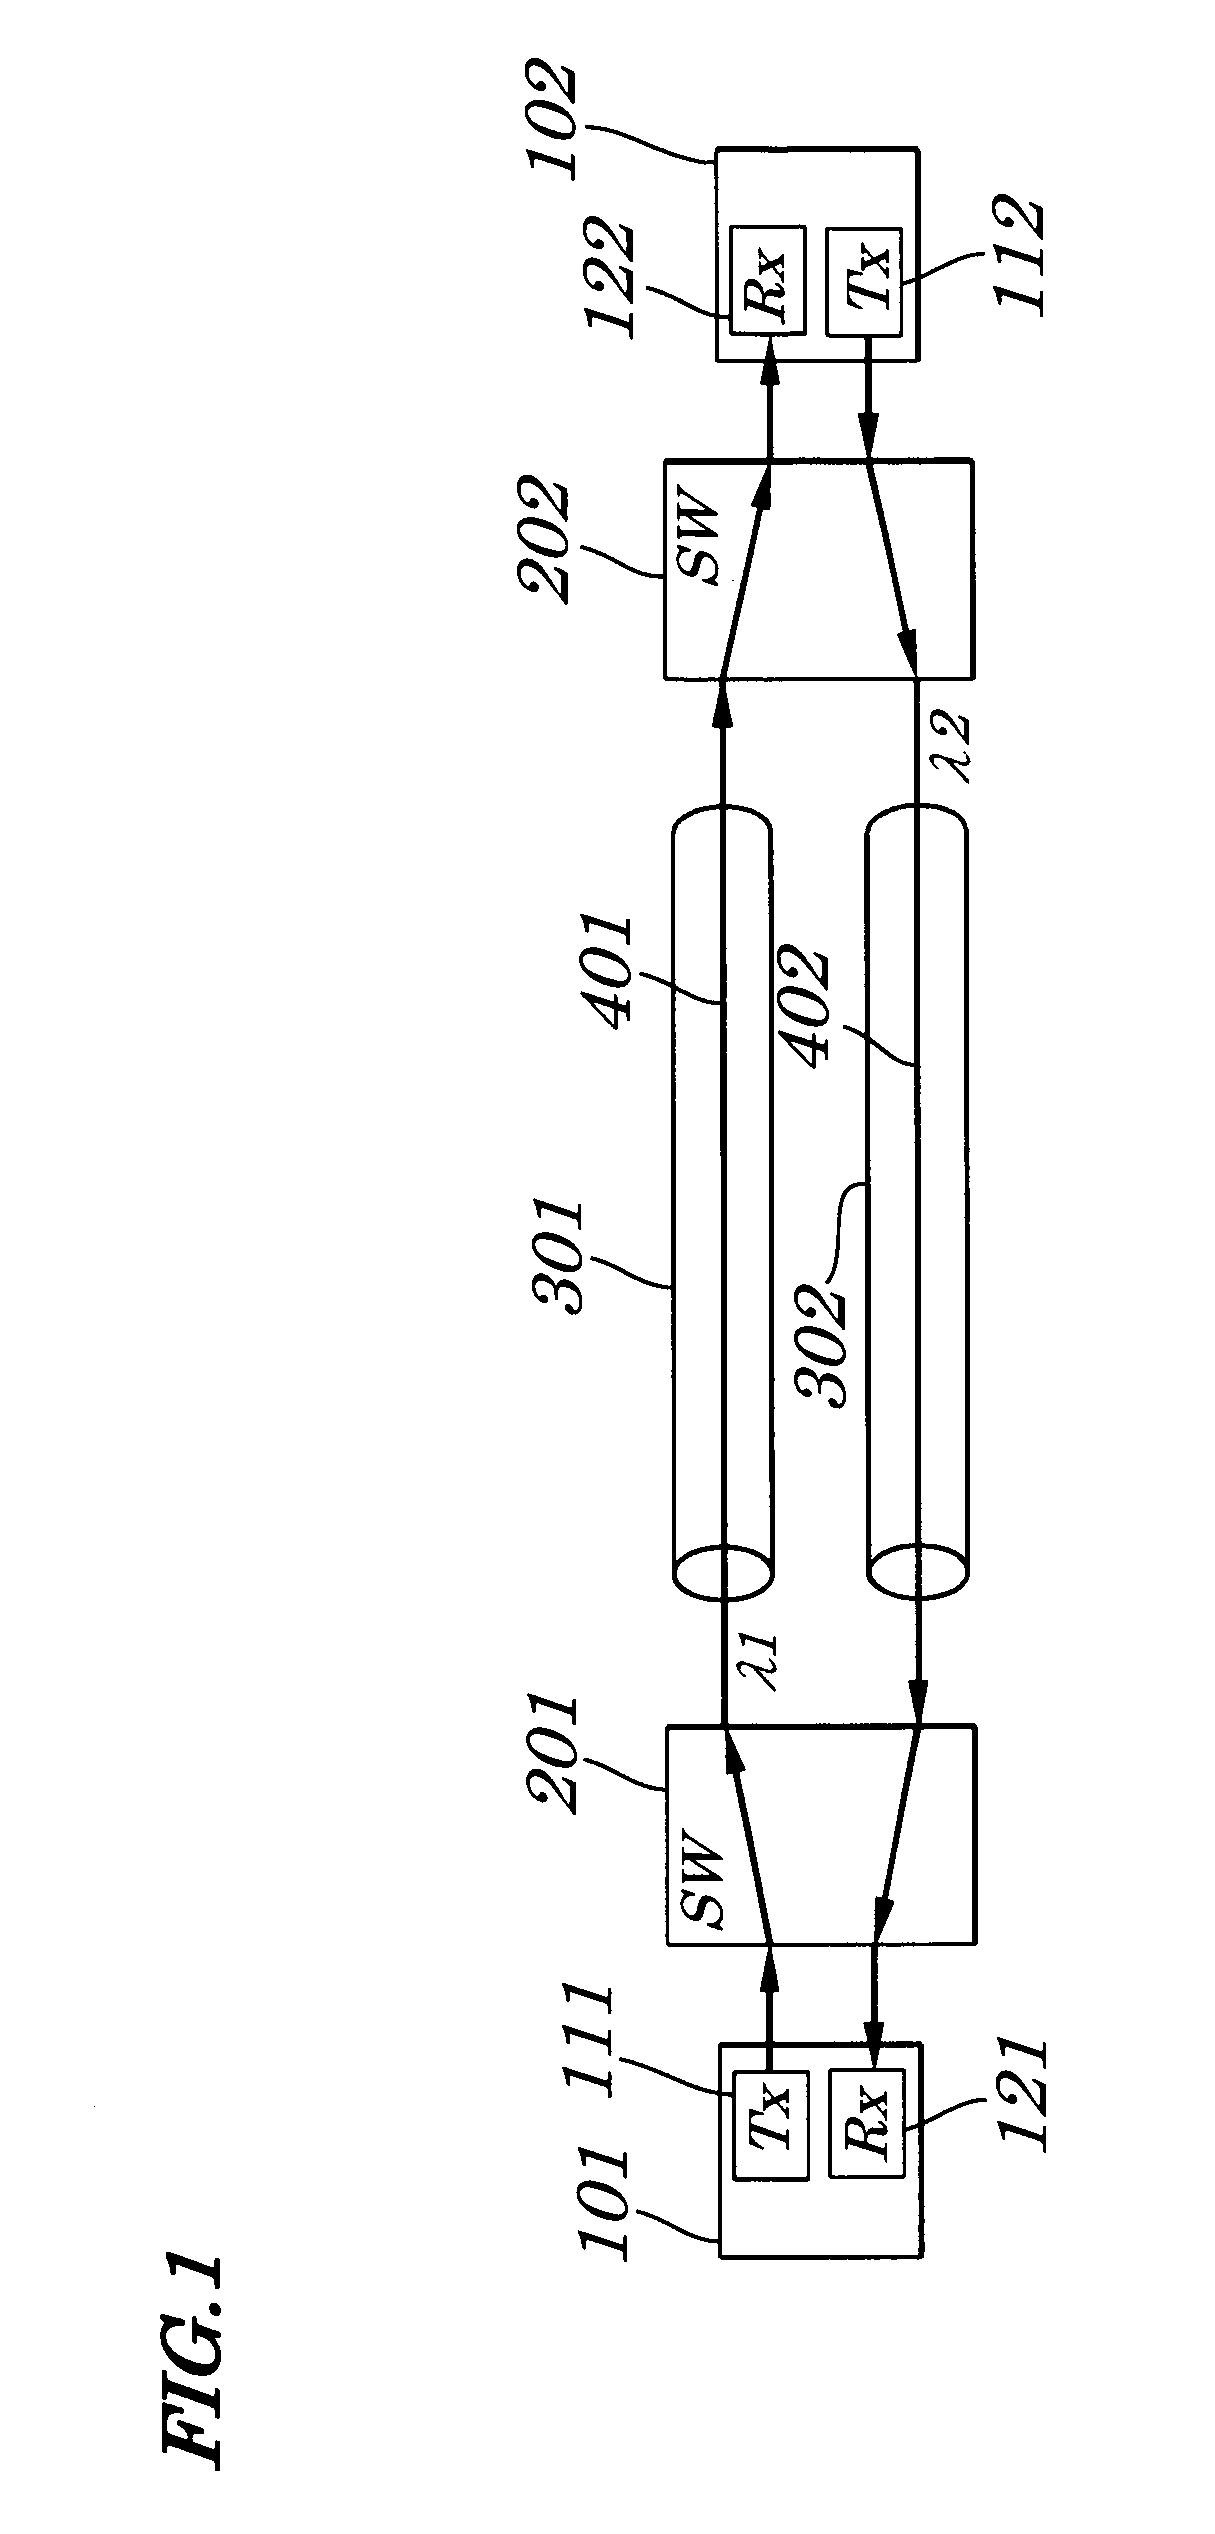 Optical signal switching device for use in an optical protection network